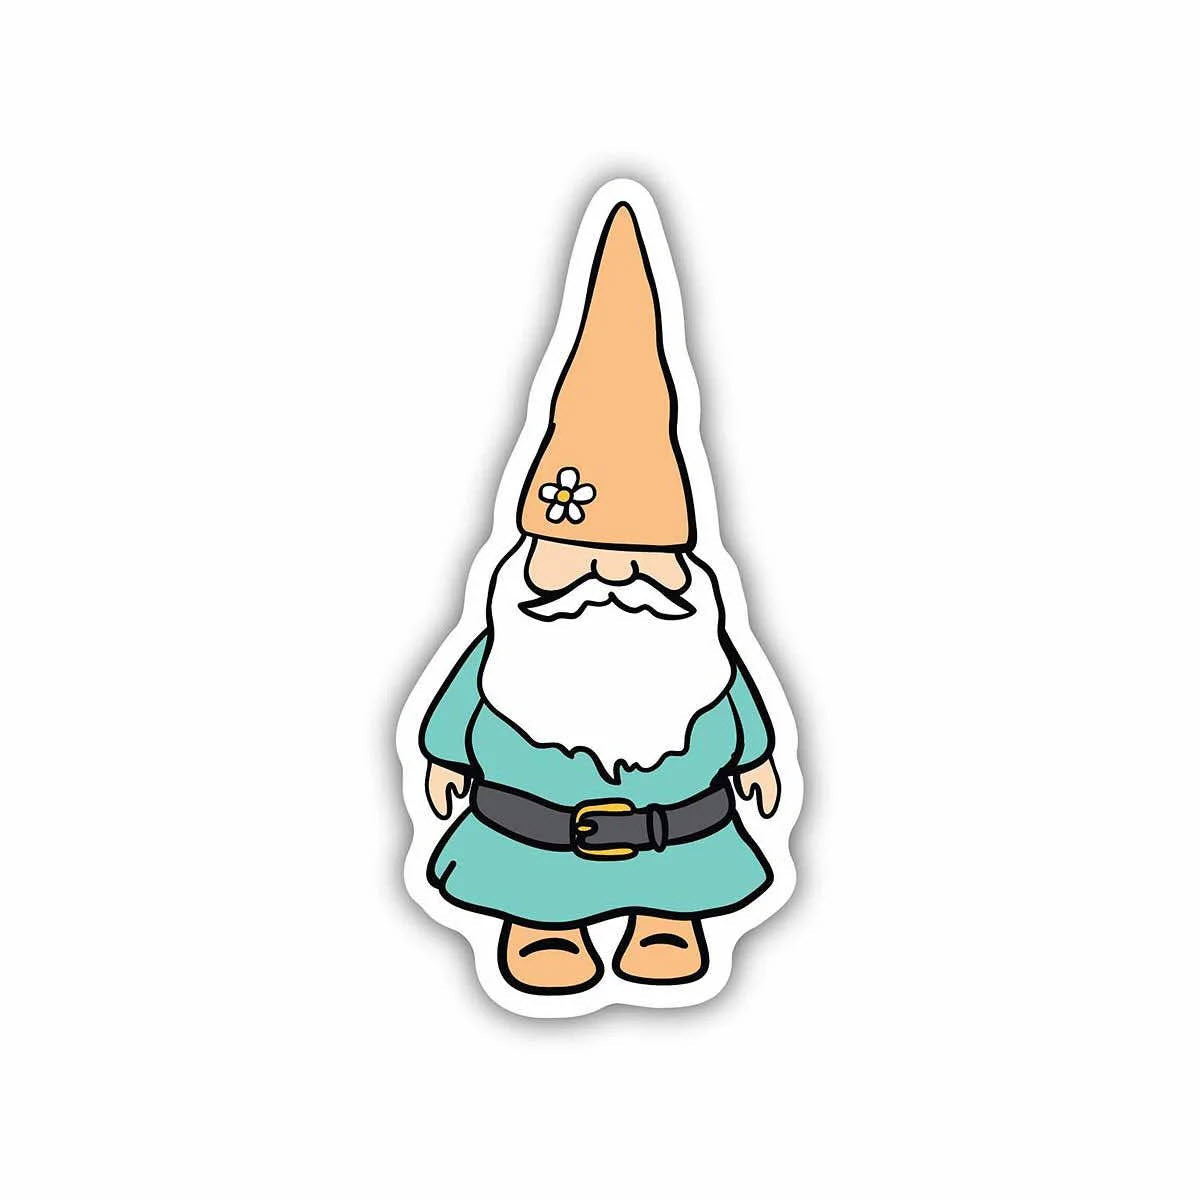 Spring STICKERS NORTHWEST GNOME featuring a whimsical garden gnome with a long white beard, wearing a blue shirt, green vest, and brown belt on weatherproof vinyl to add a pop of color from Stickers Northwest.